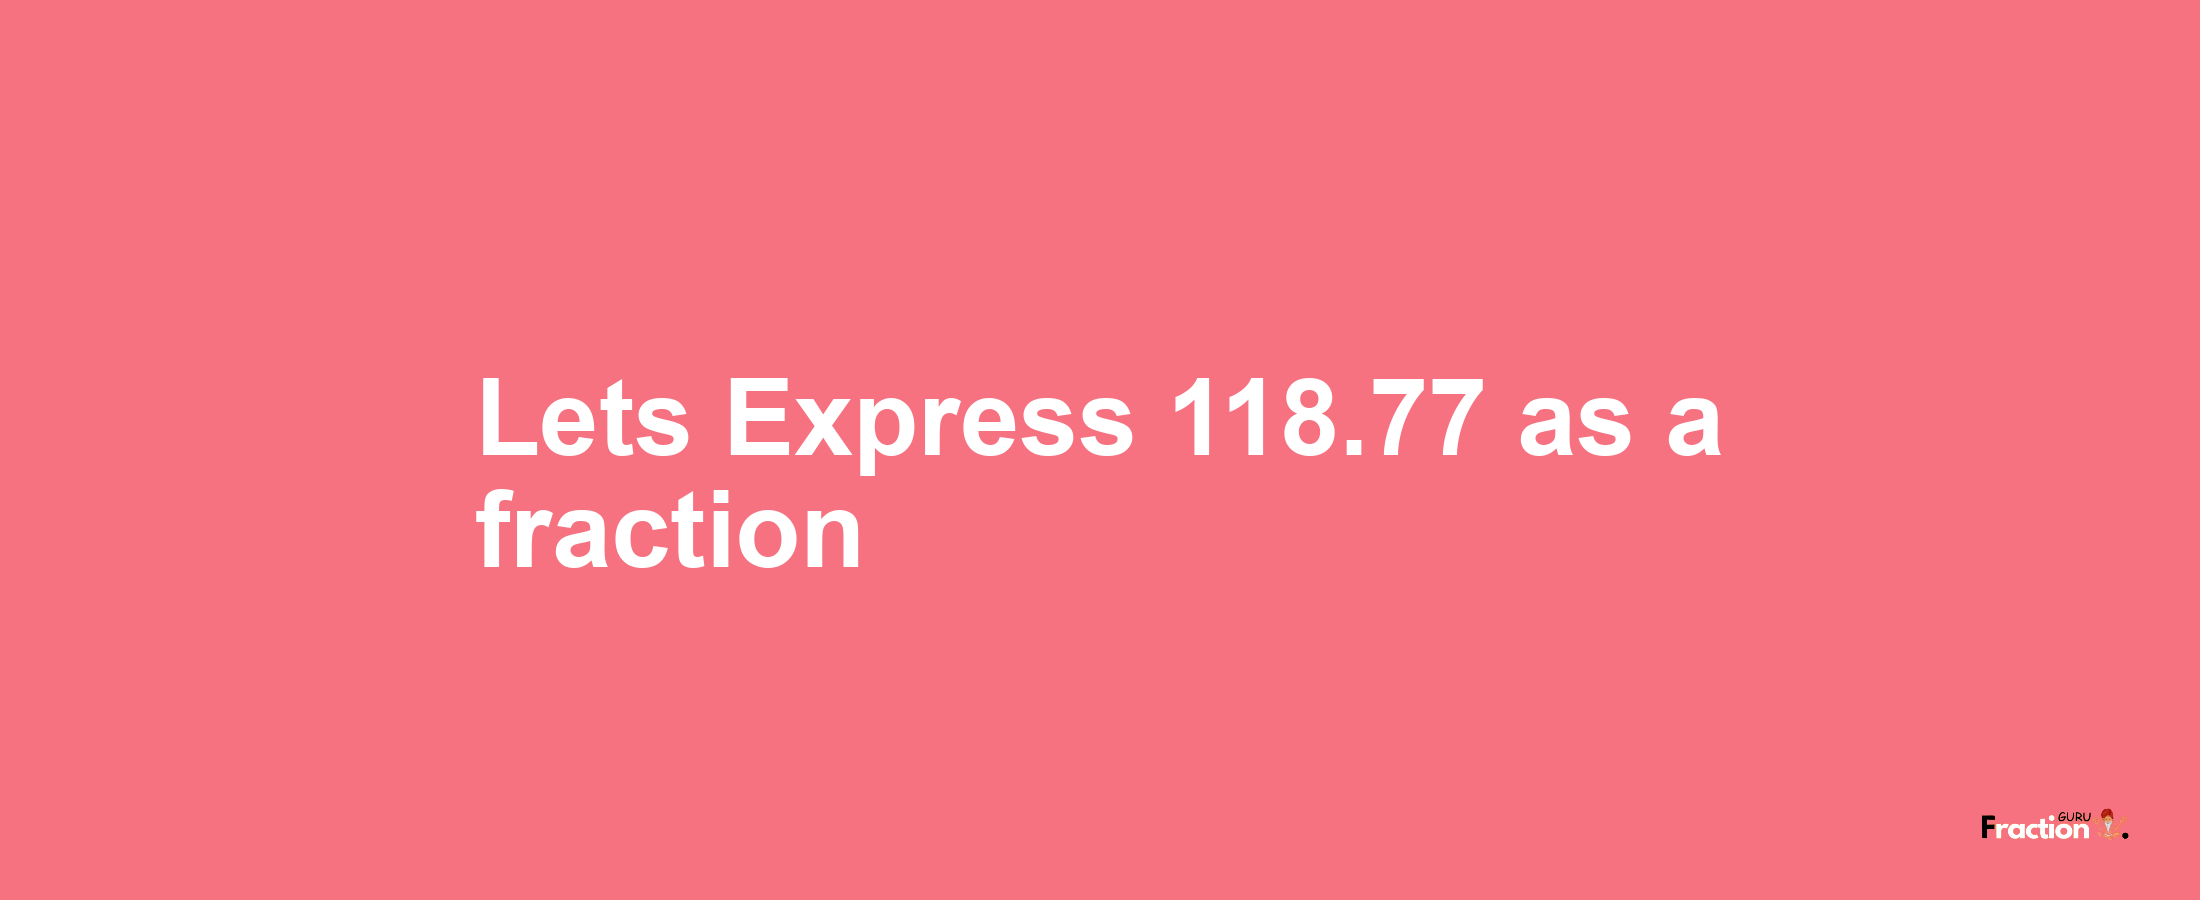 Lets Express 118.77 as afraction